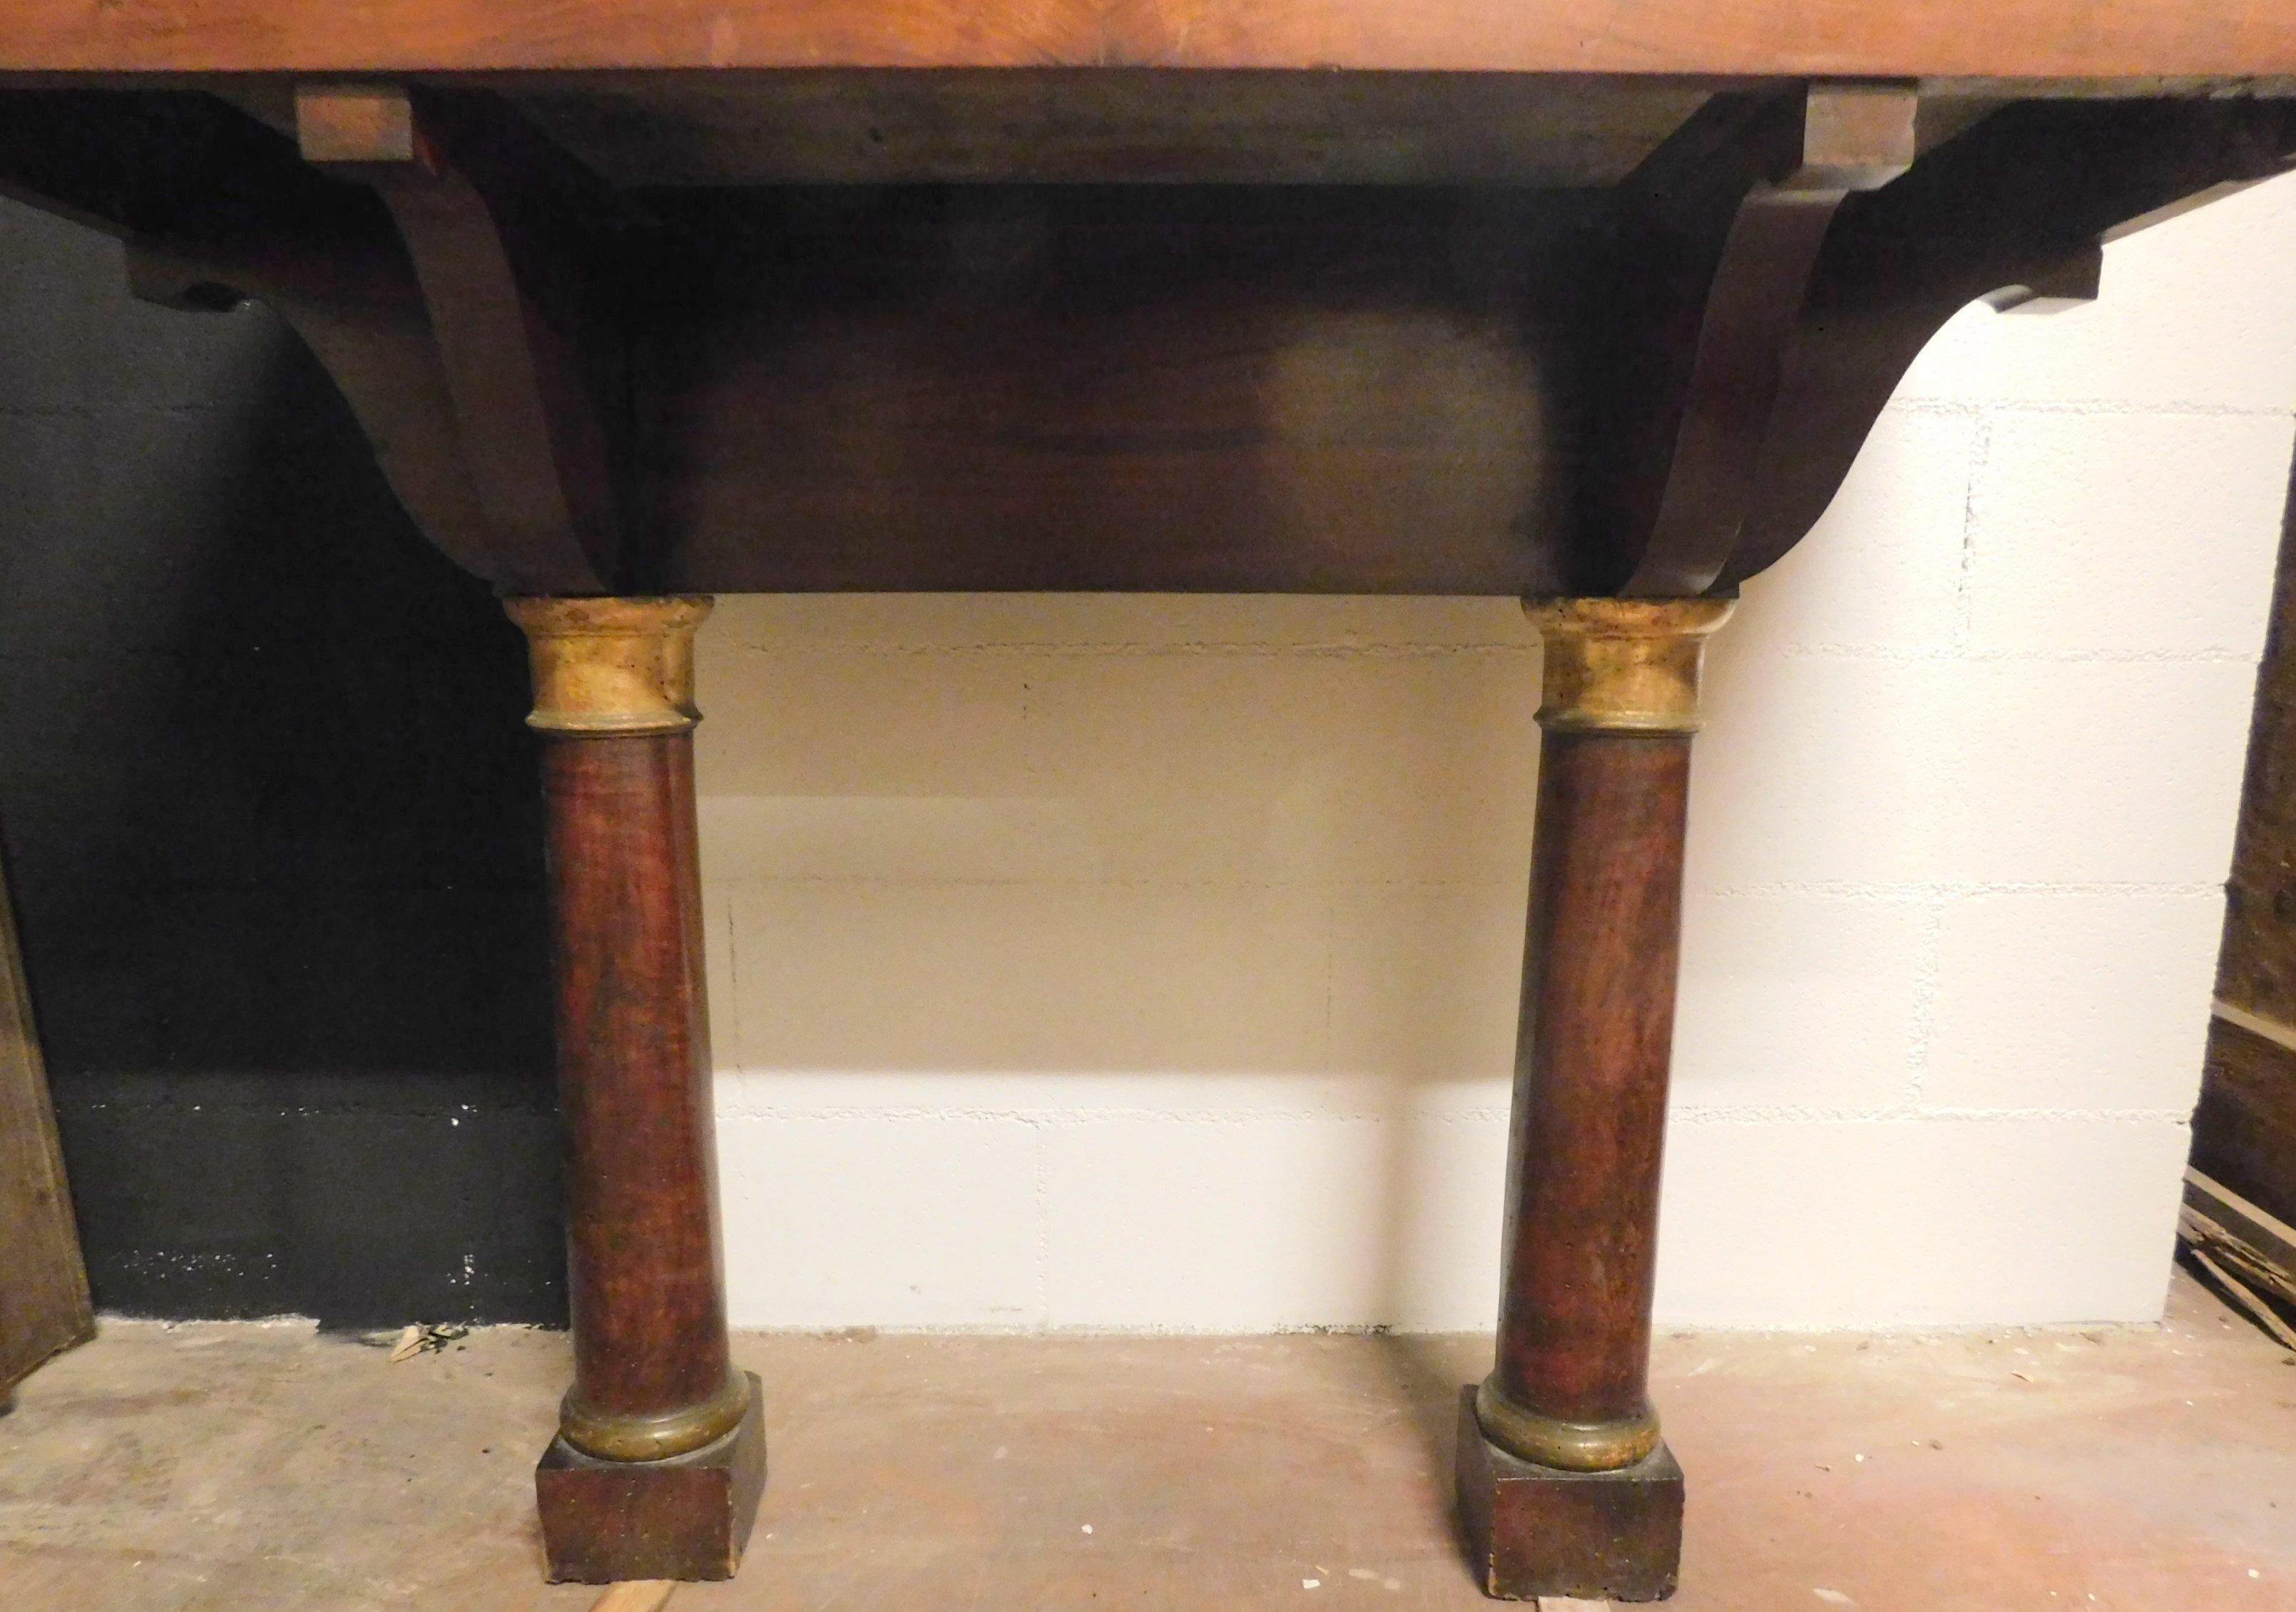 Antique Empire Style Console Table in Walnut with Original Mirror, 19th Century For Sale 4